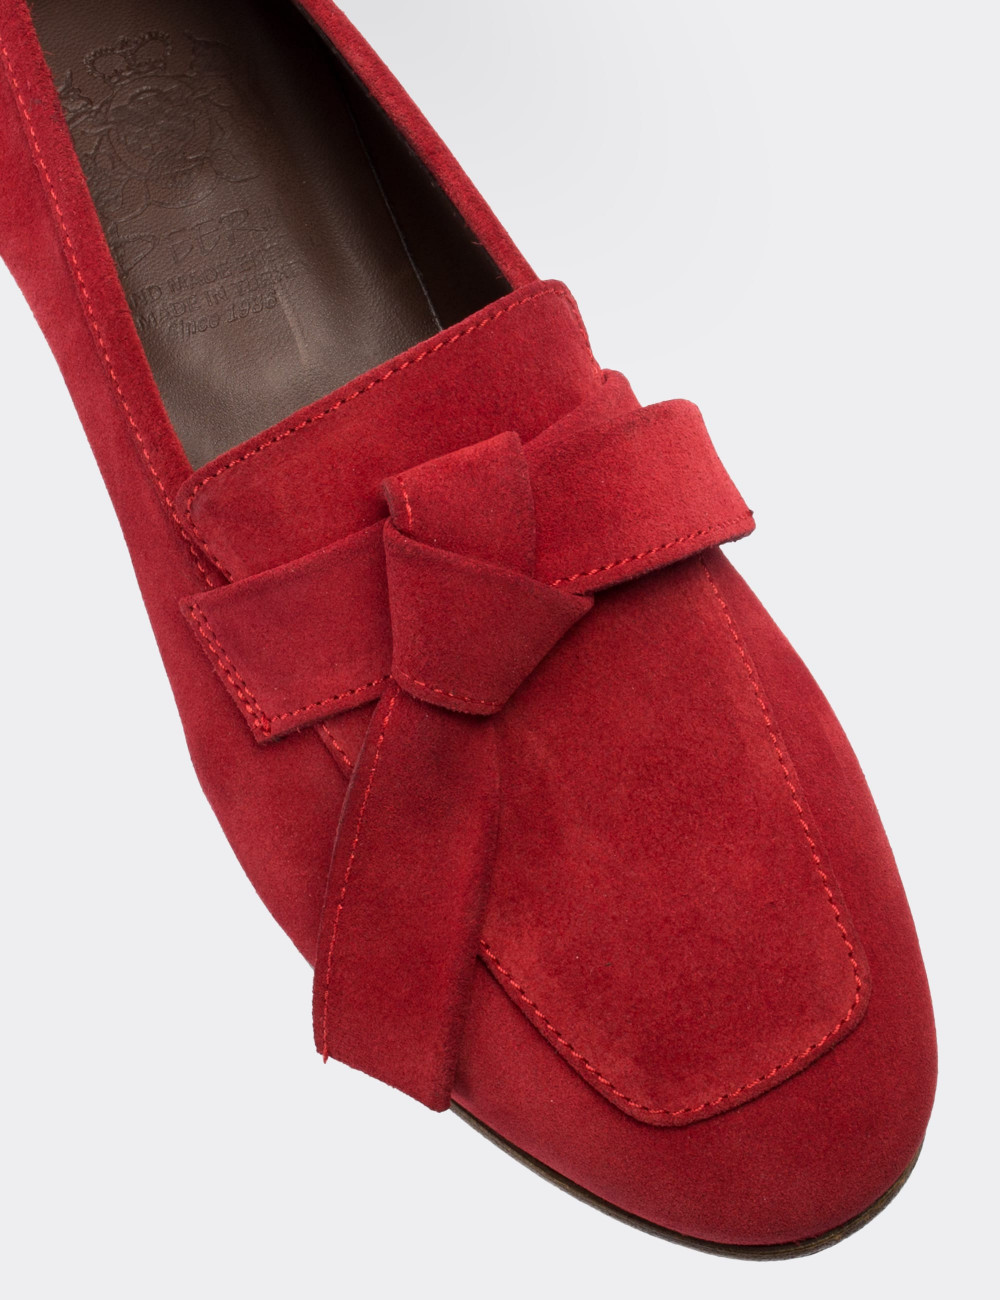 Red Suede Leather Loafers - 01744ZKRMM01